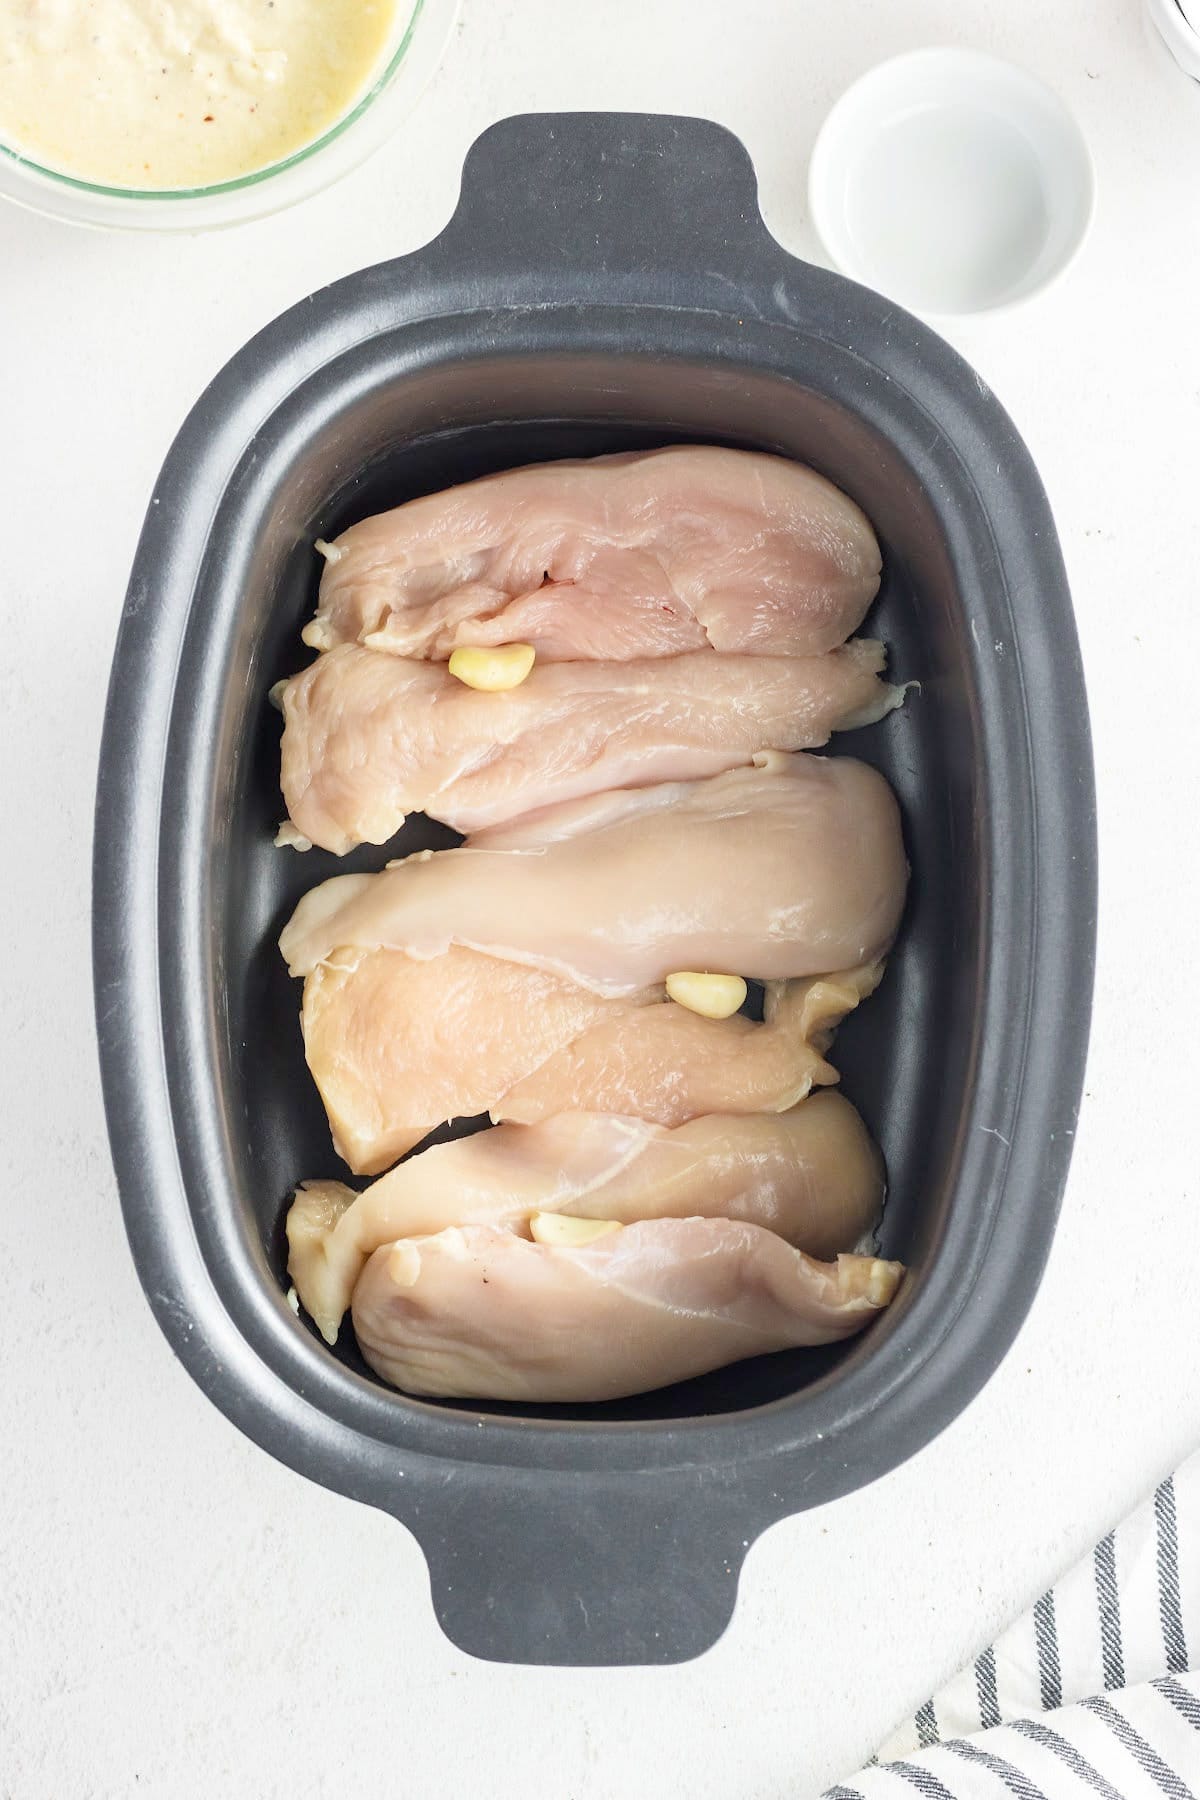 Add chicken and garlic to slow cooker.